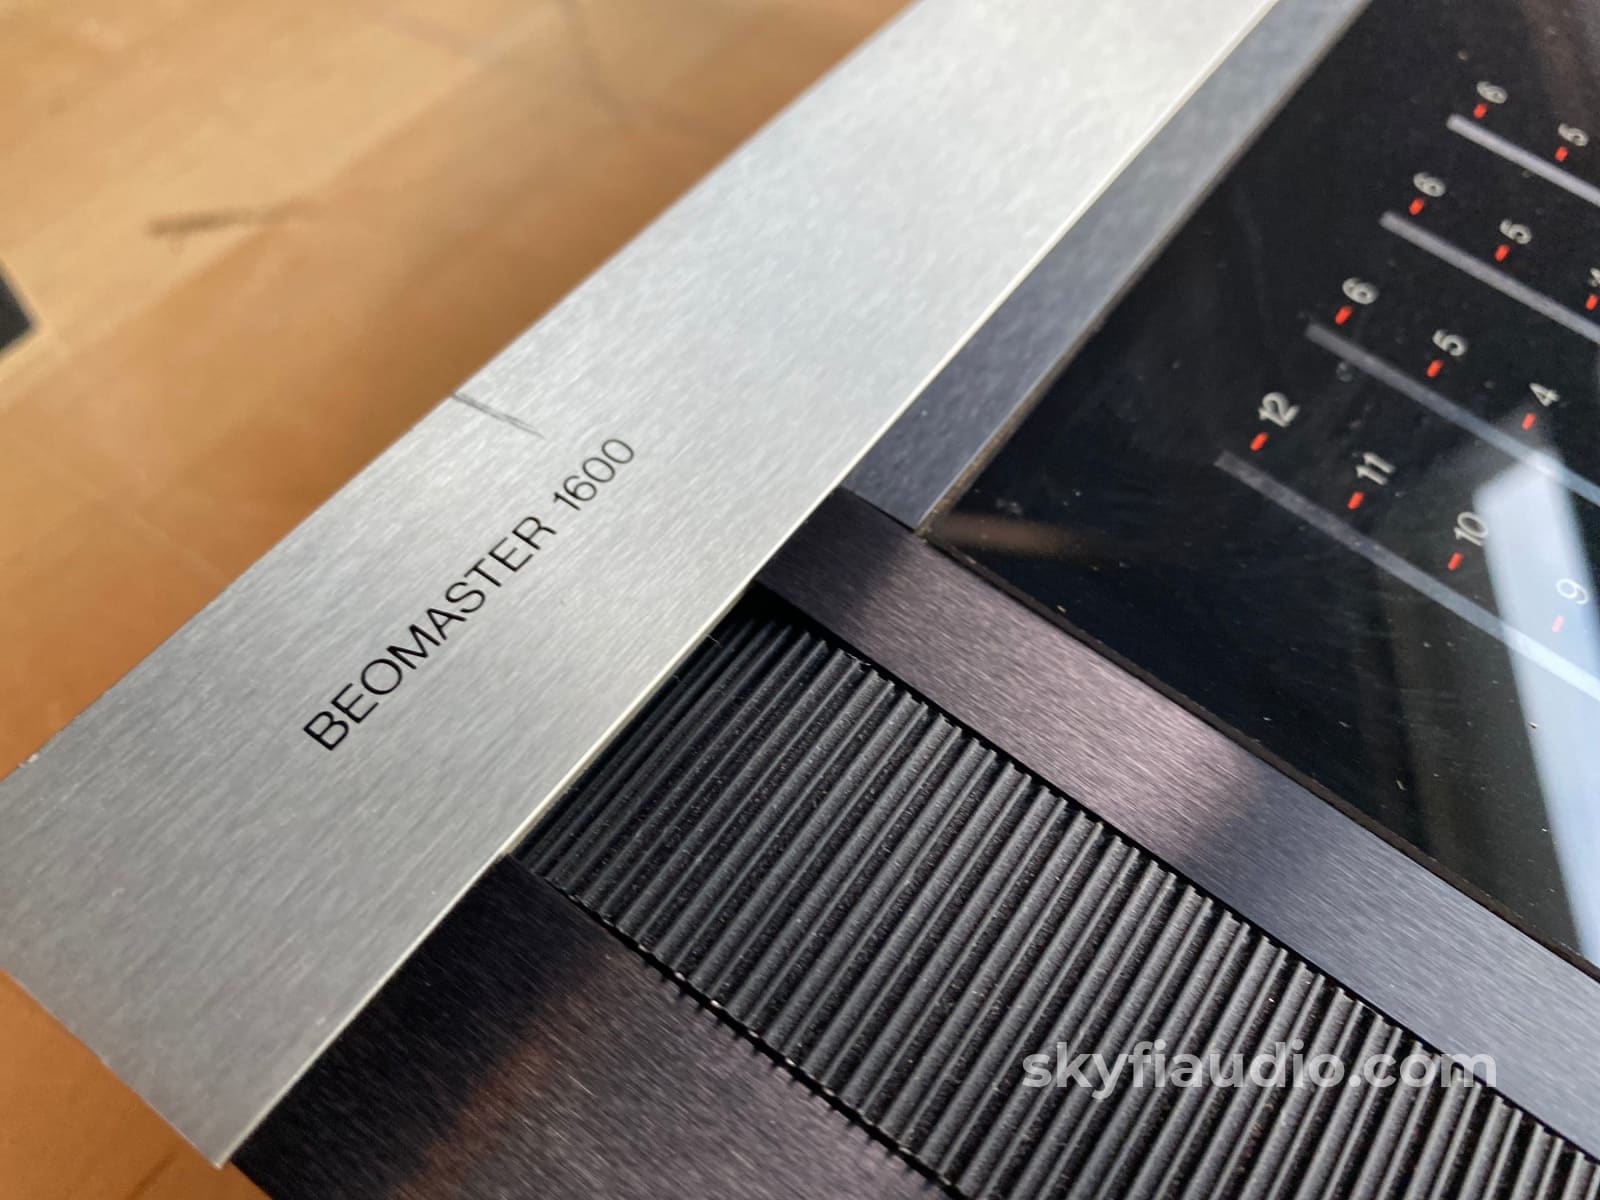 Bang & Olufsen Beomaster 1600 Receiver With Beovox S45 Speakers Integrated Amplifier